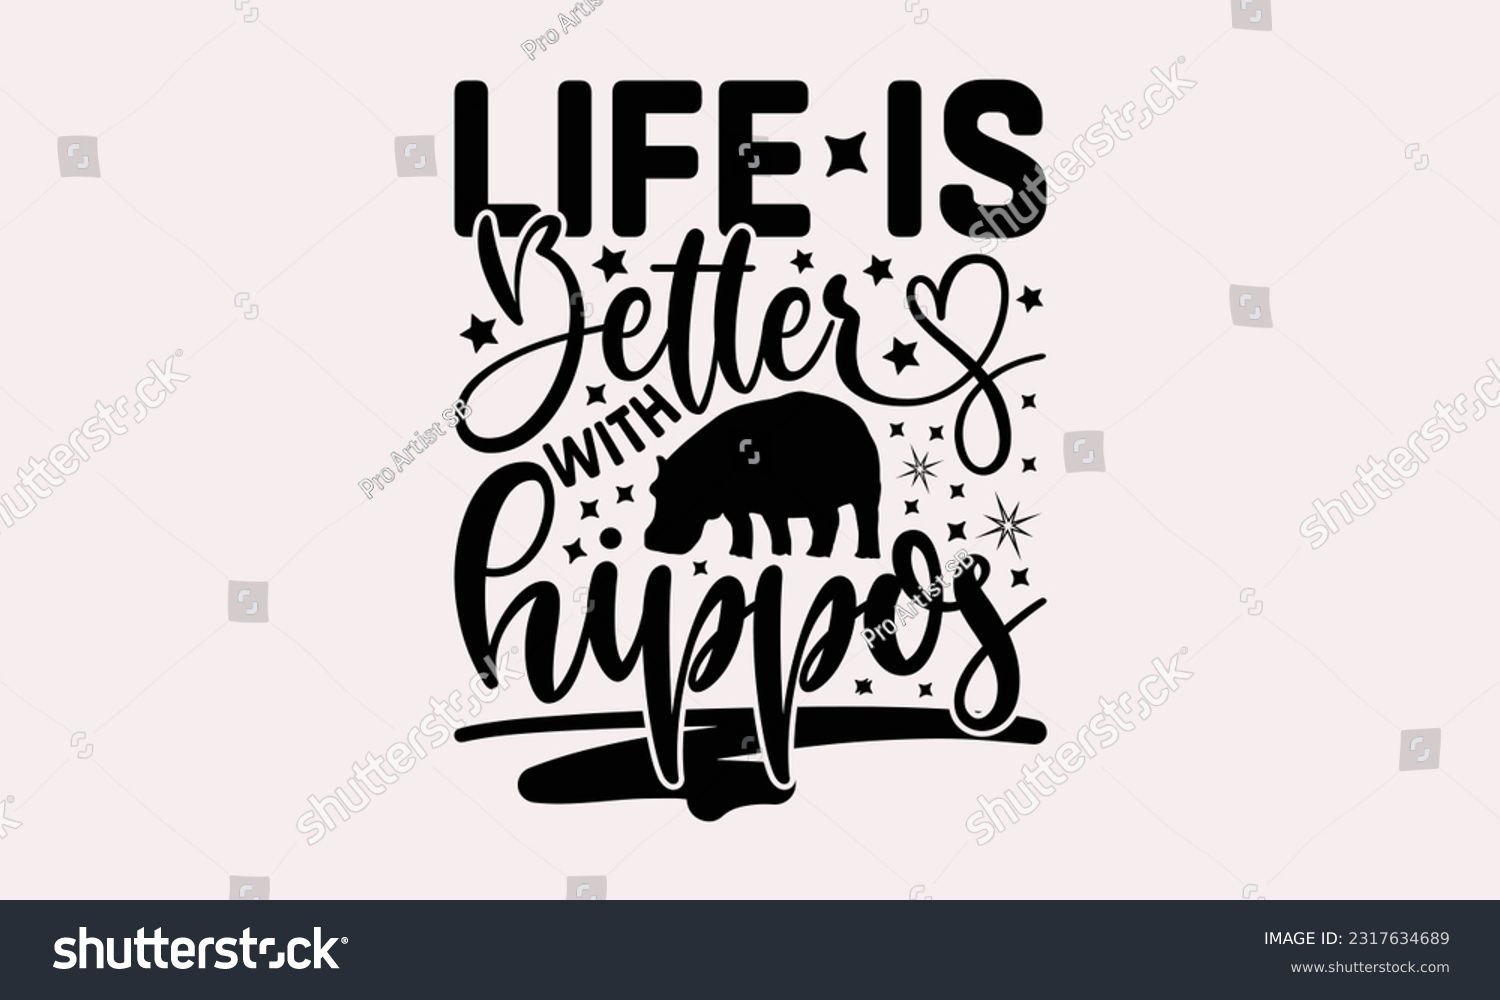 SVG of Life Is Better With Hippos - Hippo T-shirt Design, Hippo SVG Quotes, Greeting Card Template With Typography Text, Hand Drawn Lettering Phrase Isolated On White Background. svg